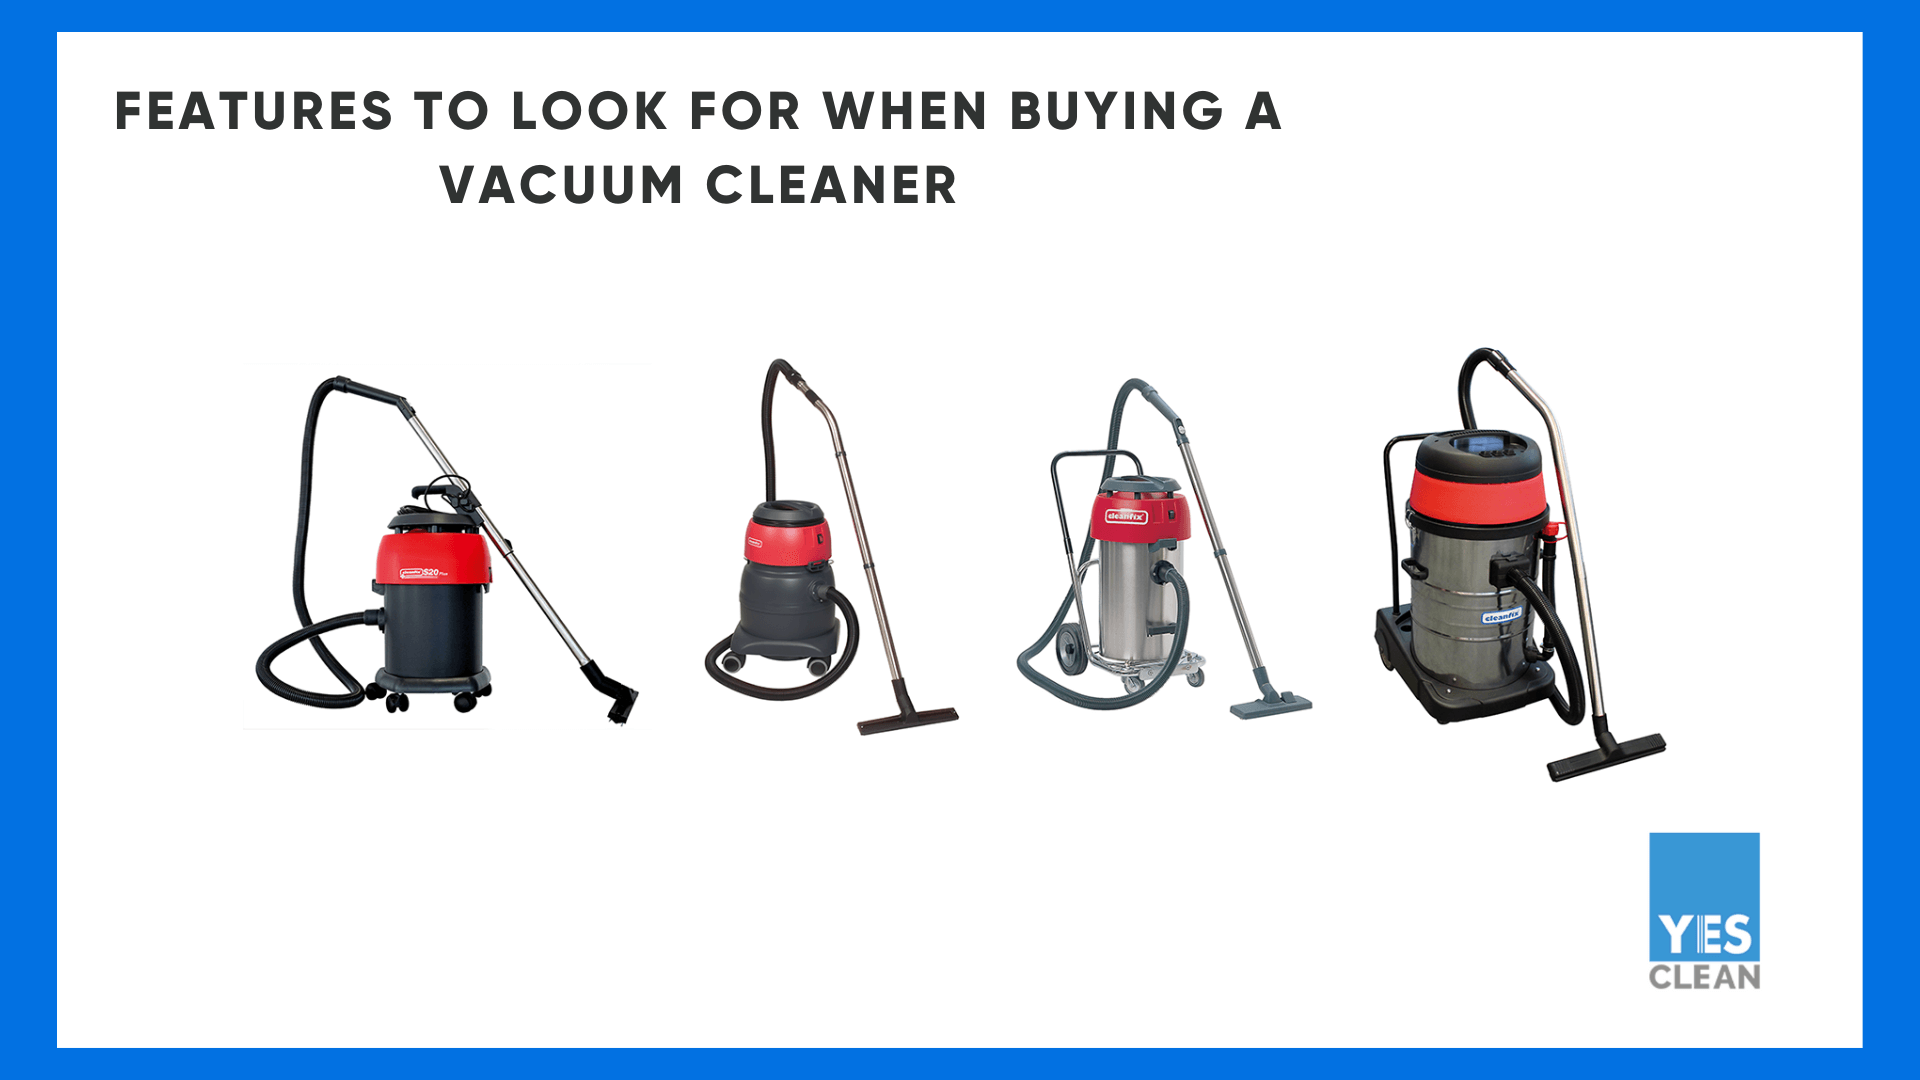 Features to cosider when buying a Vacuum Cleaner